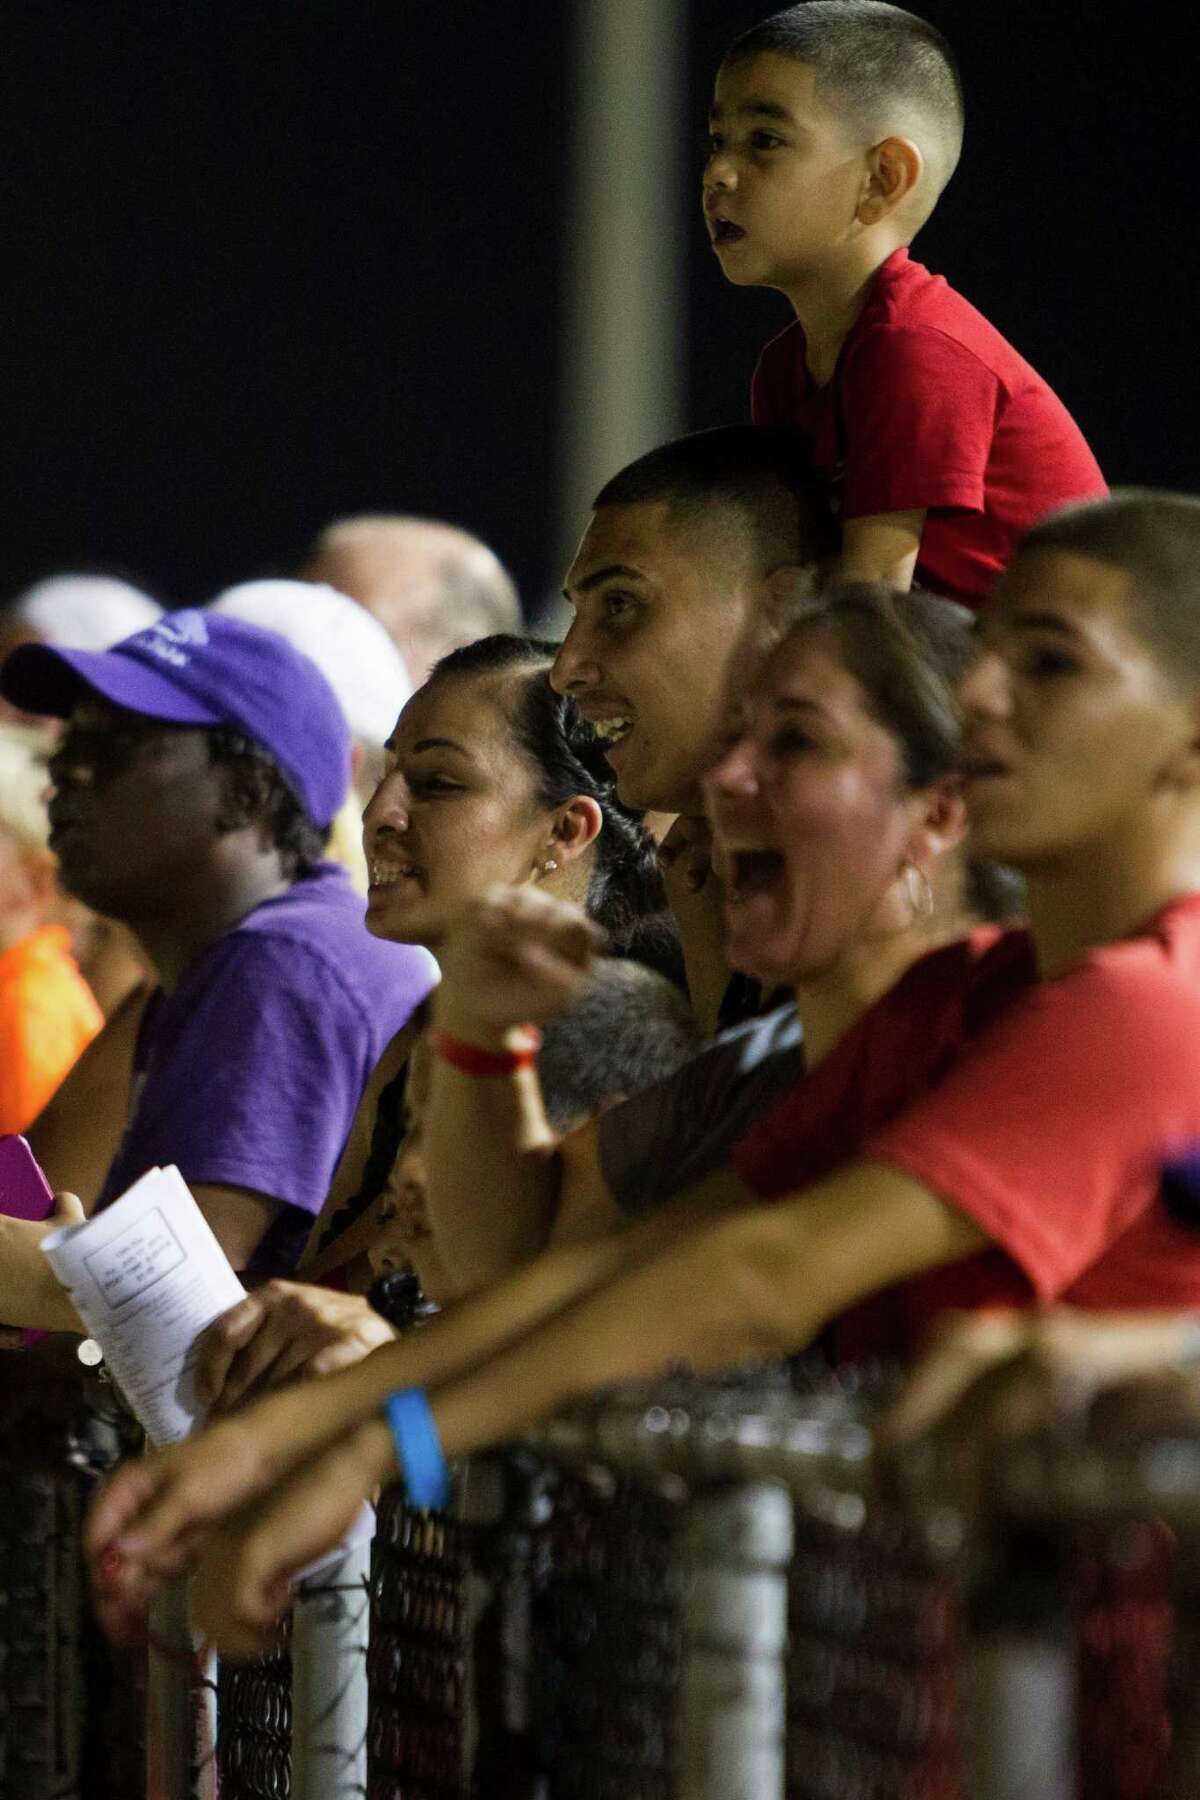 Fans watch the eighth race at Retama Park in Selma, Texas on July 17, 2015.